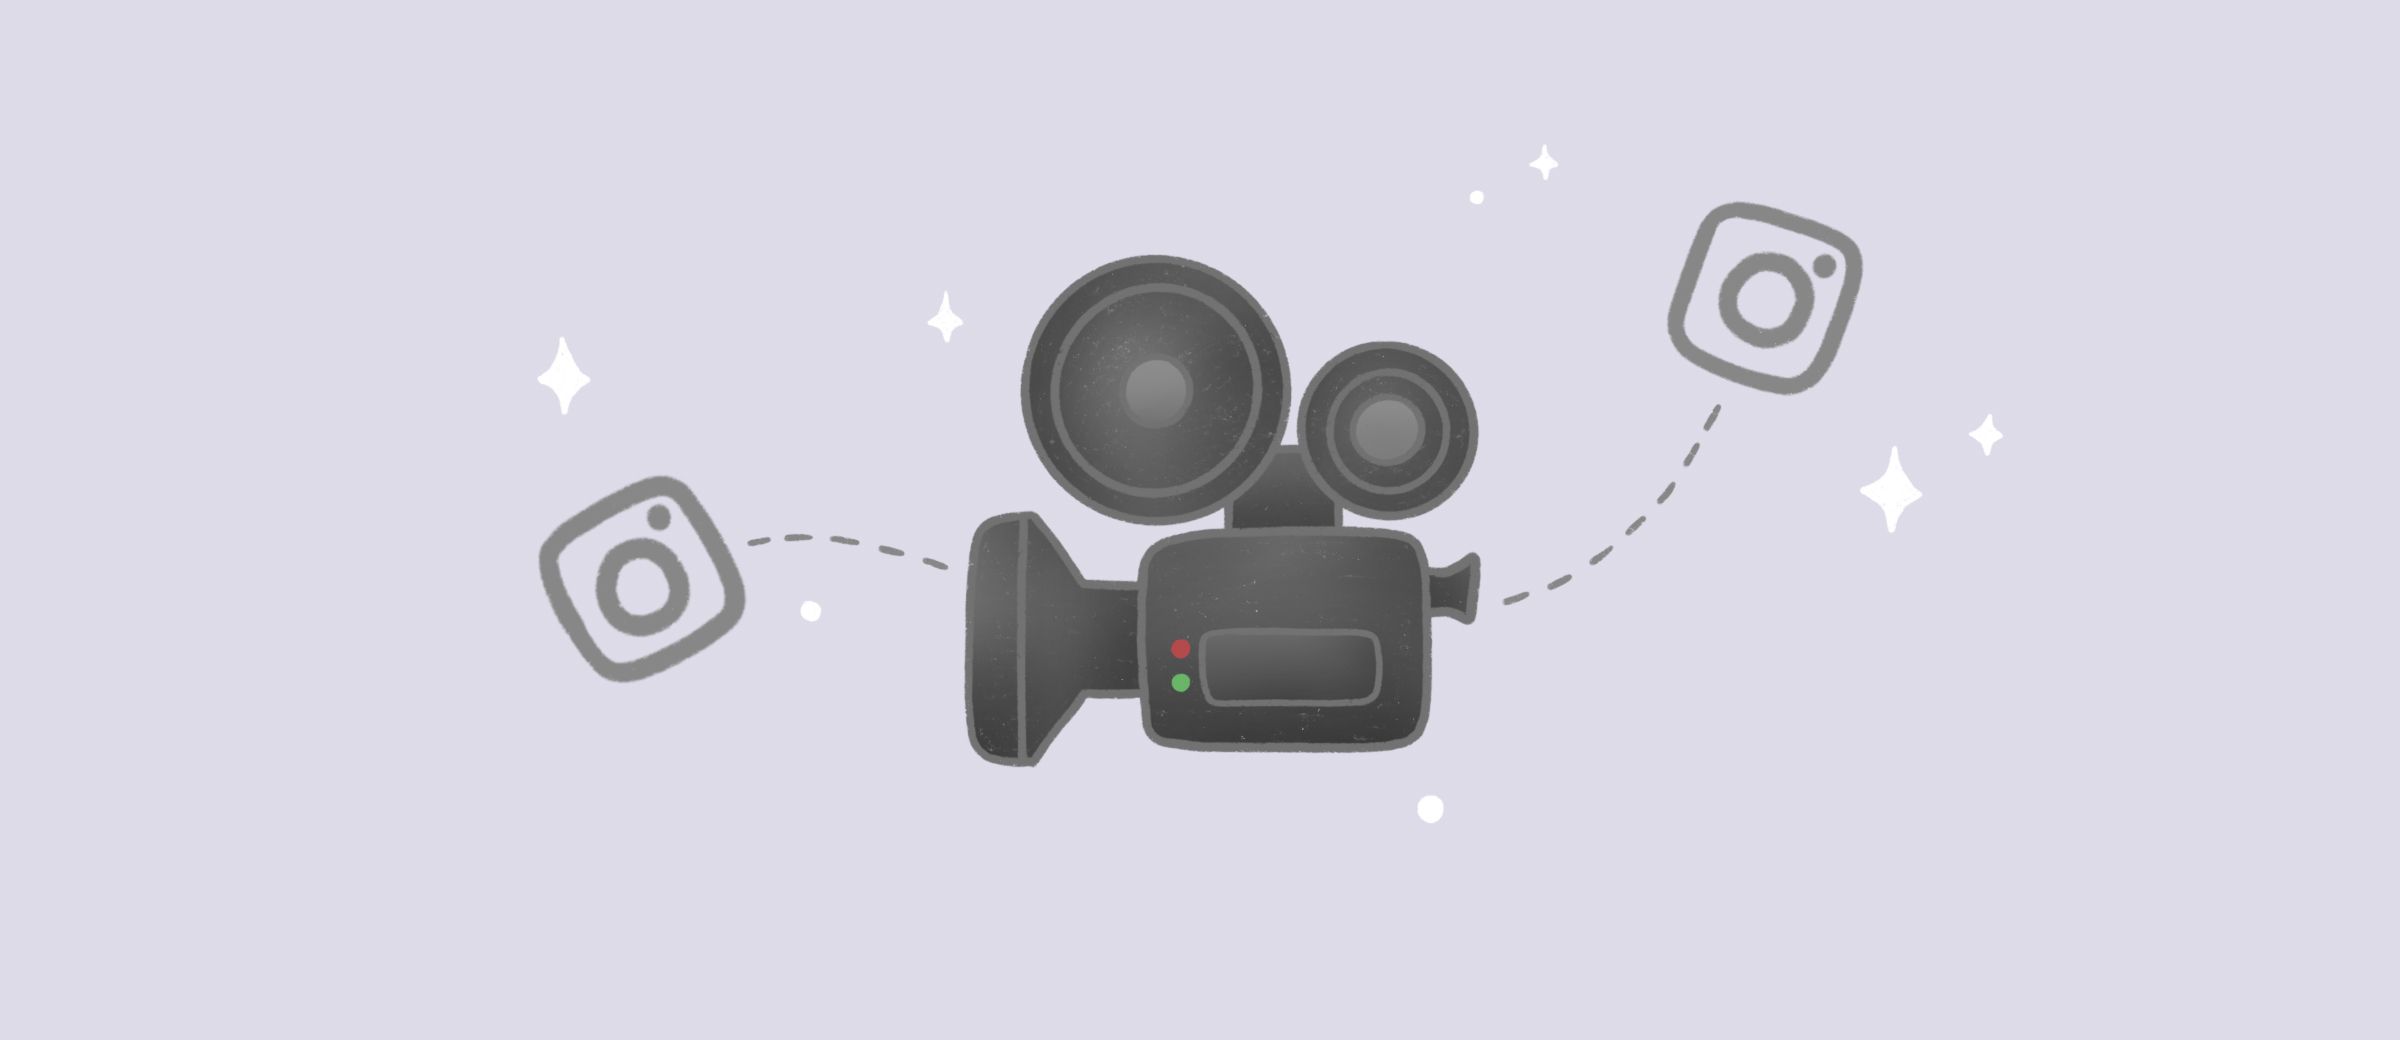 5 Tips on Improving Video Quality